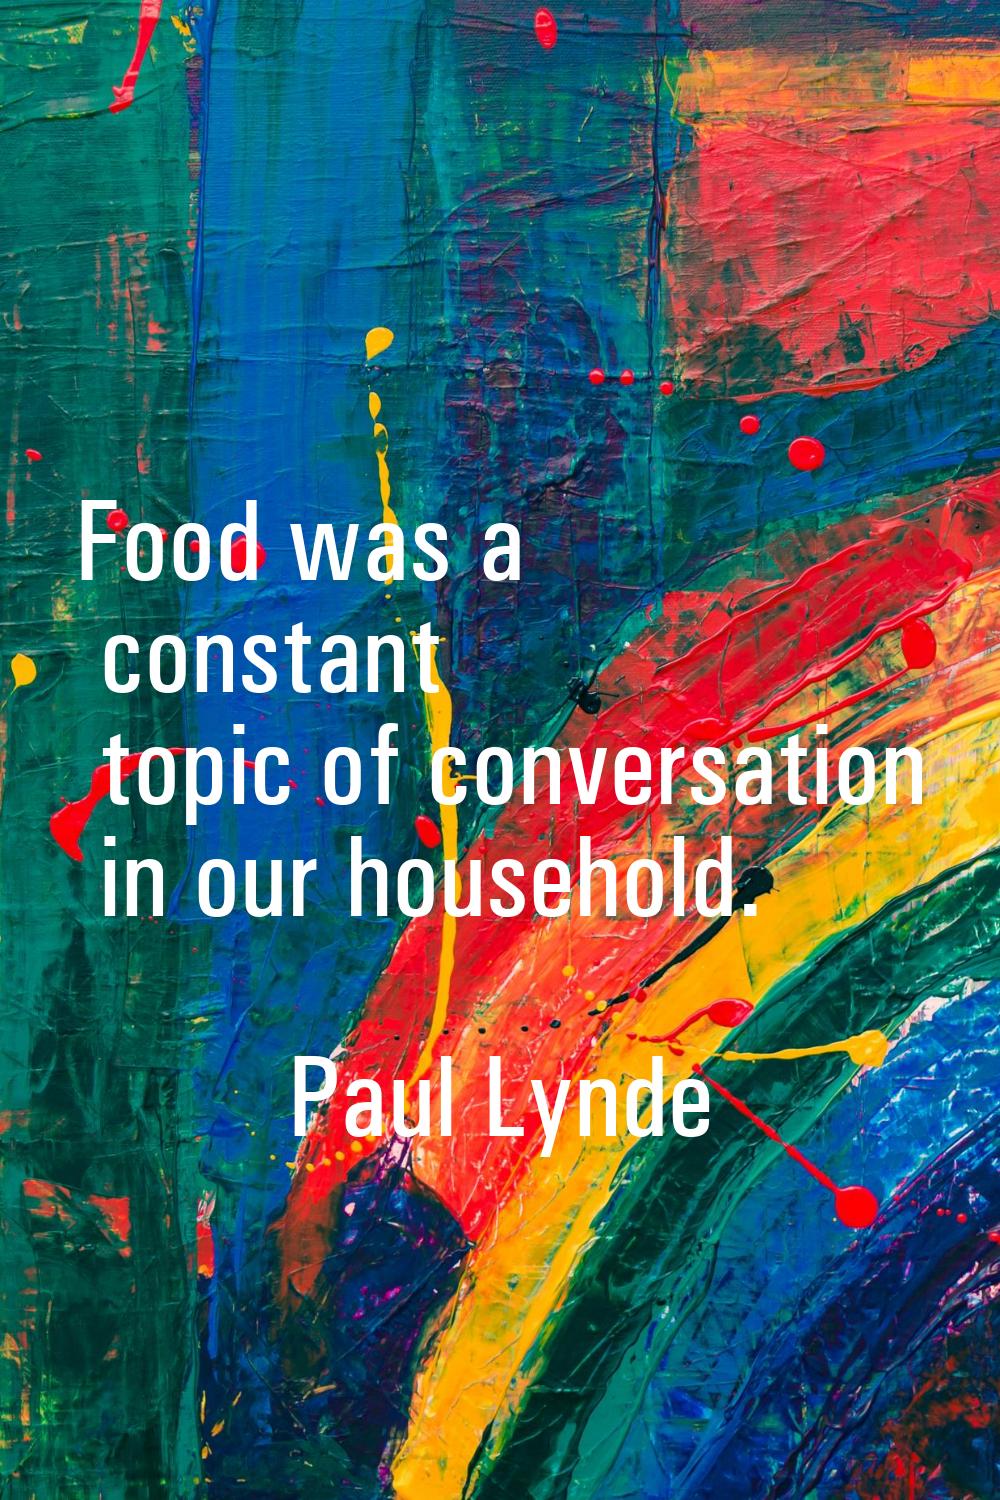 Food was a constant topic of conversation in our household.